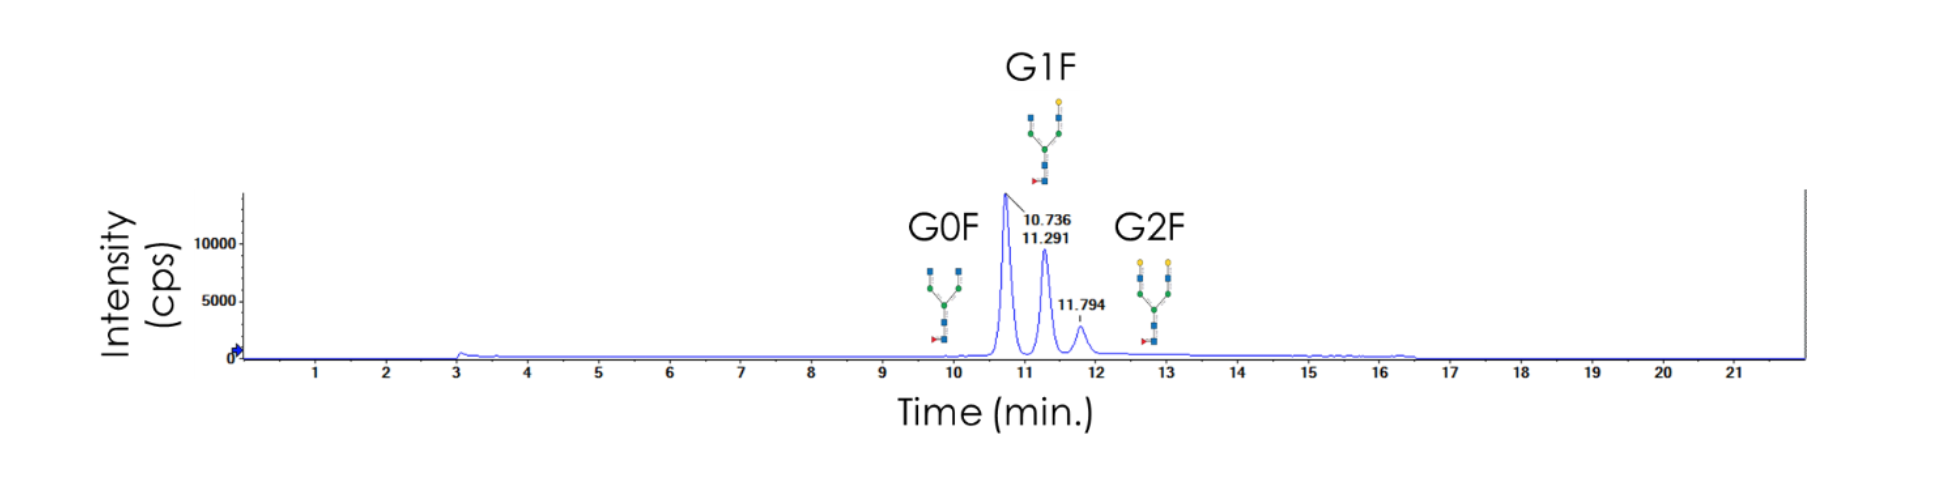 N-glycan profiling spectrometer chart - released glycan analysis